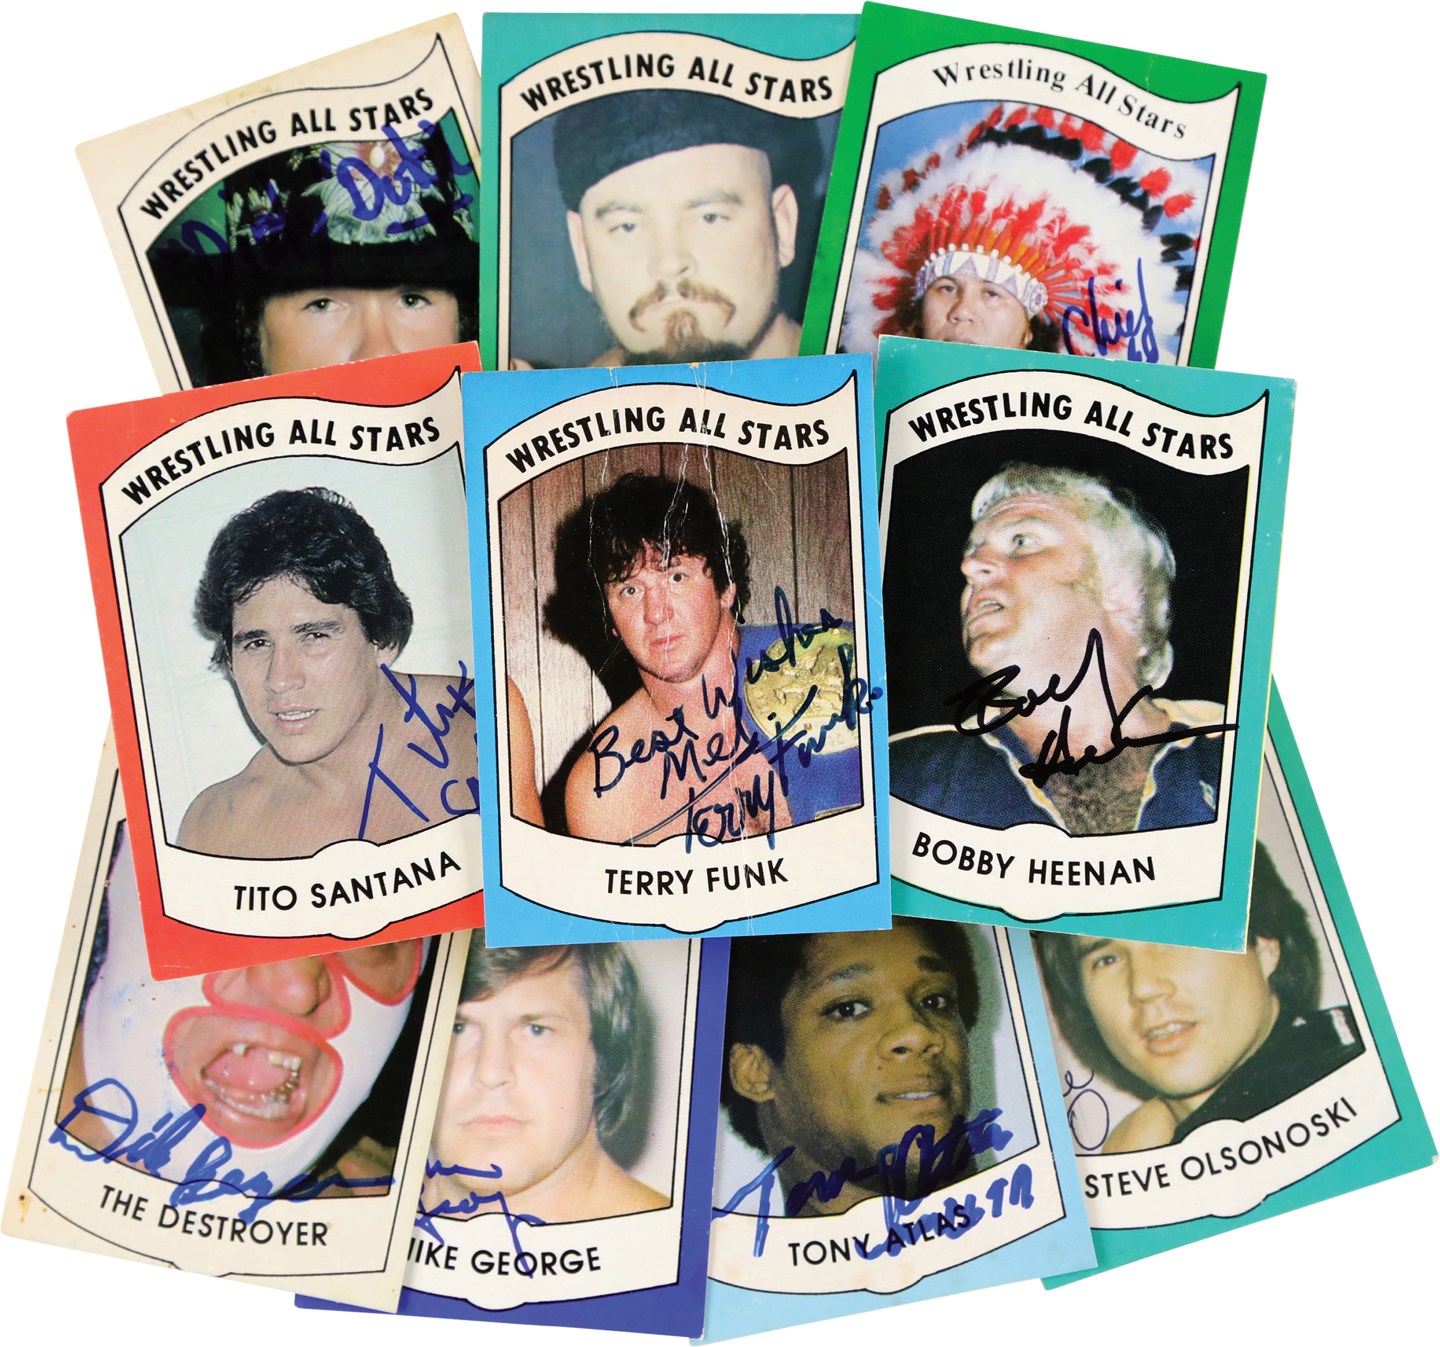 - 1982-1983 Wrestling All Stars Signed Card Collection (10)